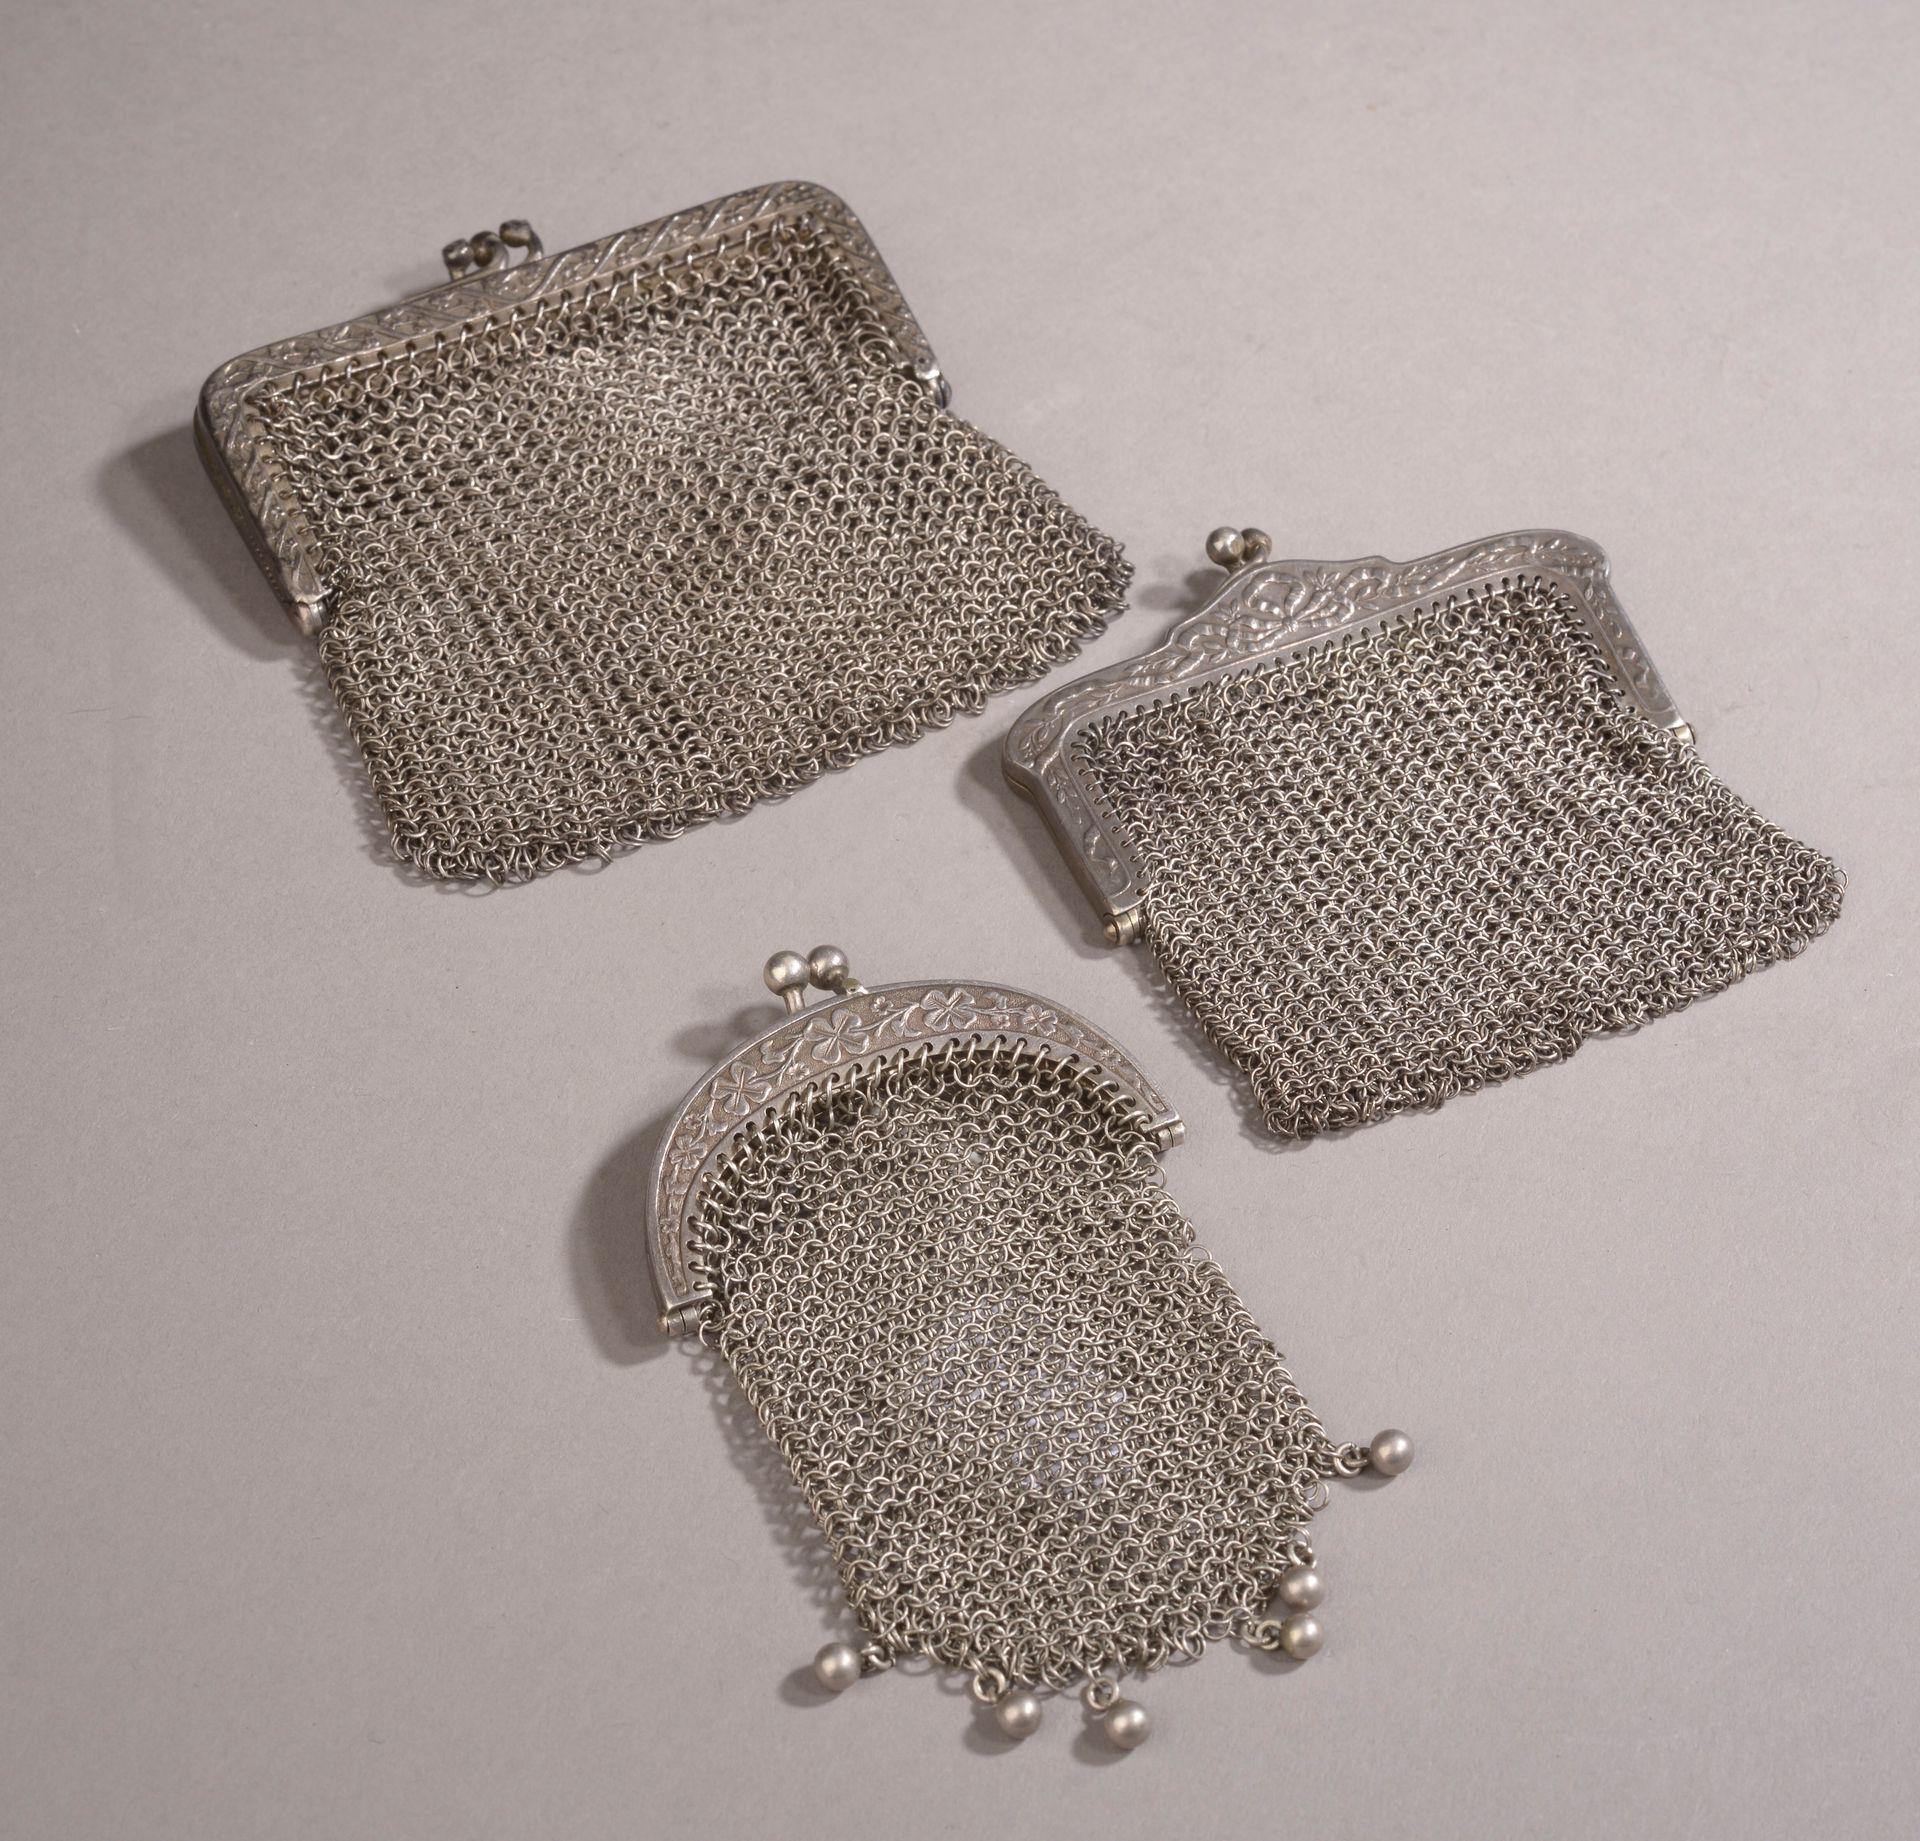 Null Three silver chainmail purses.
Boar hallmark. 
Total weight : 128,8 g